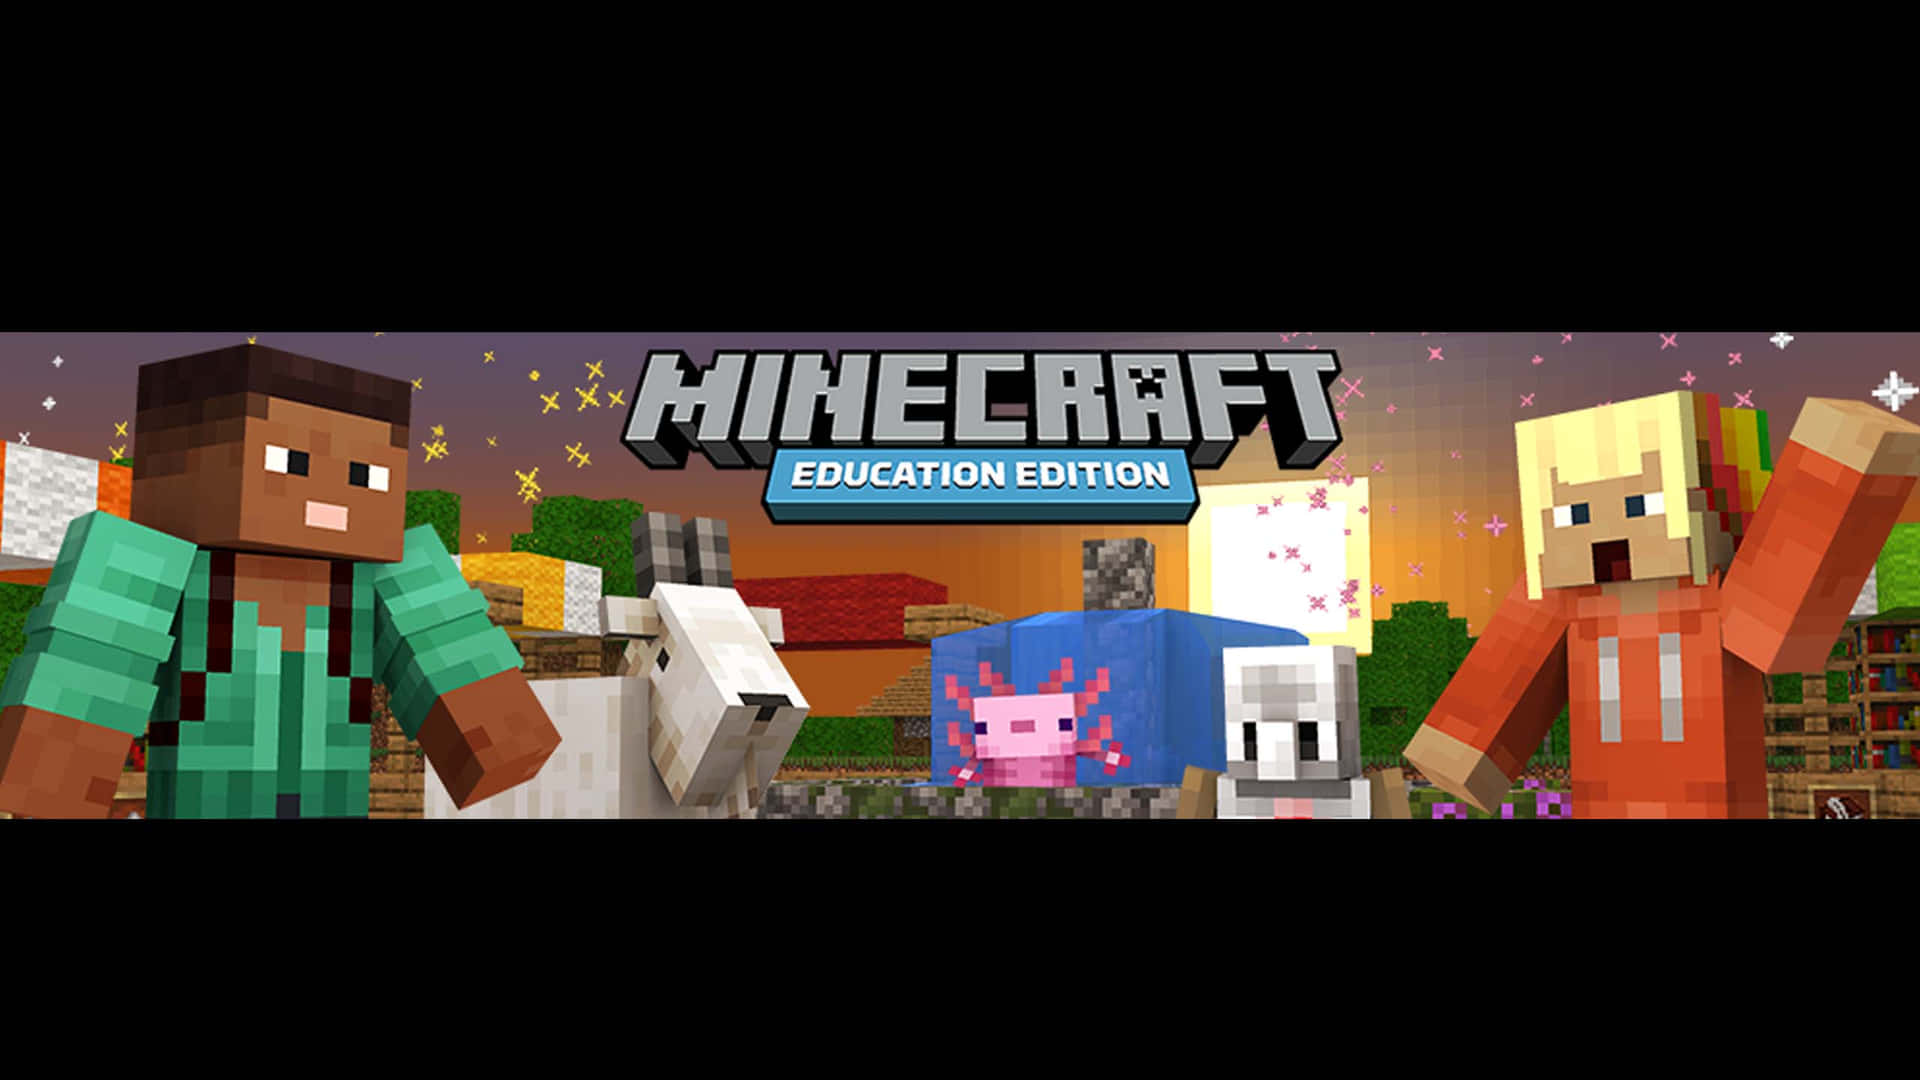 Learn with Fun: Minecraft Education Edition Classroom Wallpaper